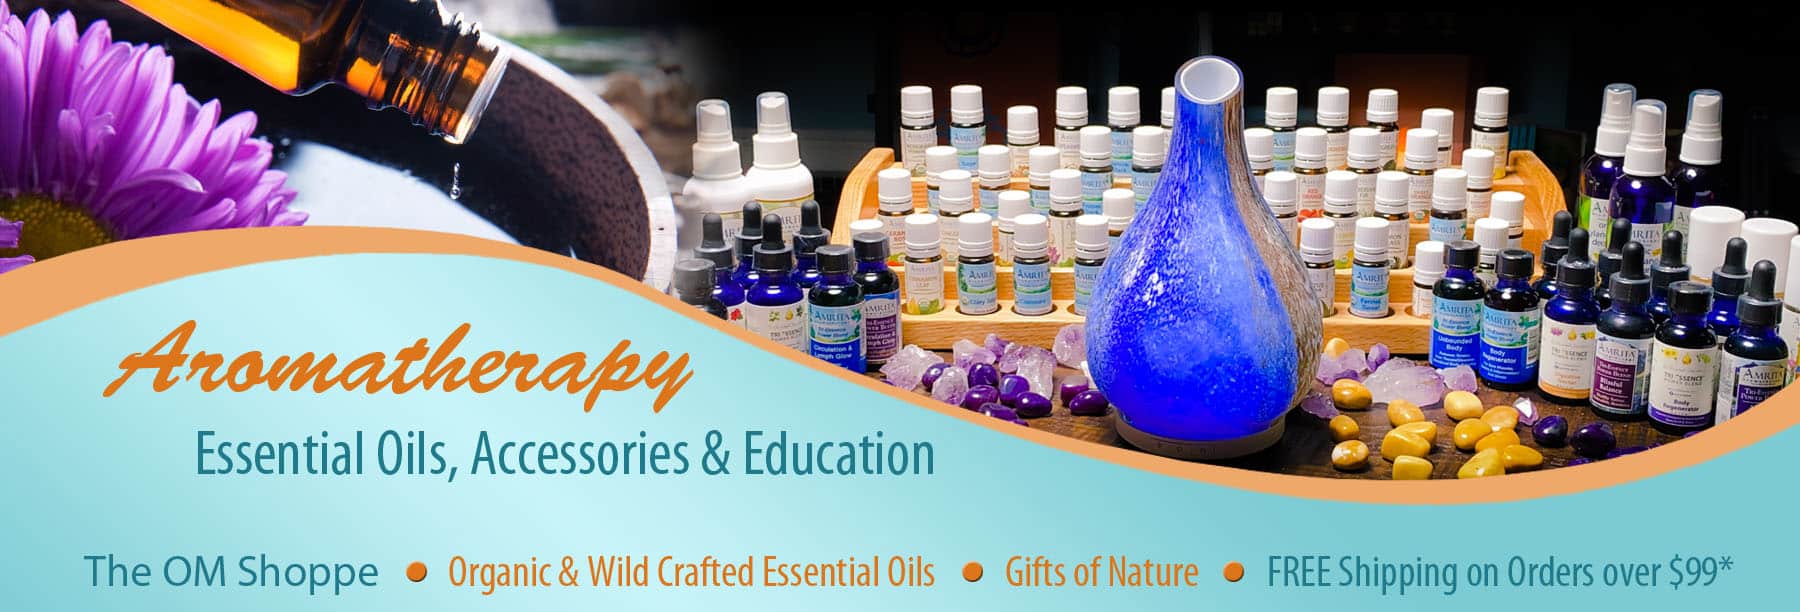 The OM Shoppe Aromatherapy, Essential Oils & Acccessories